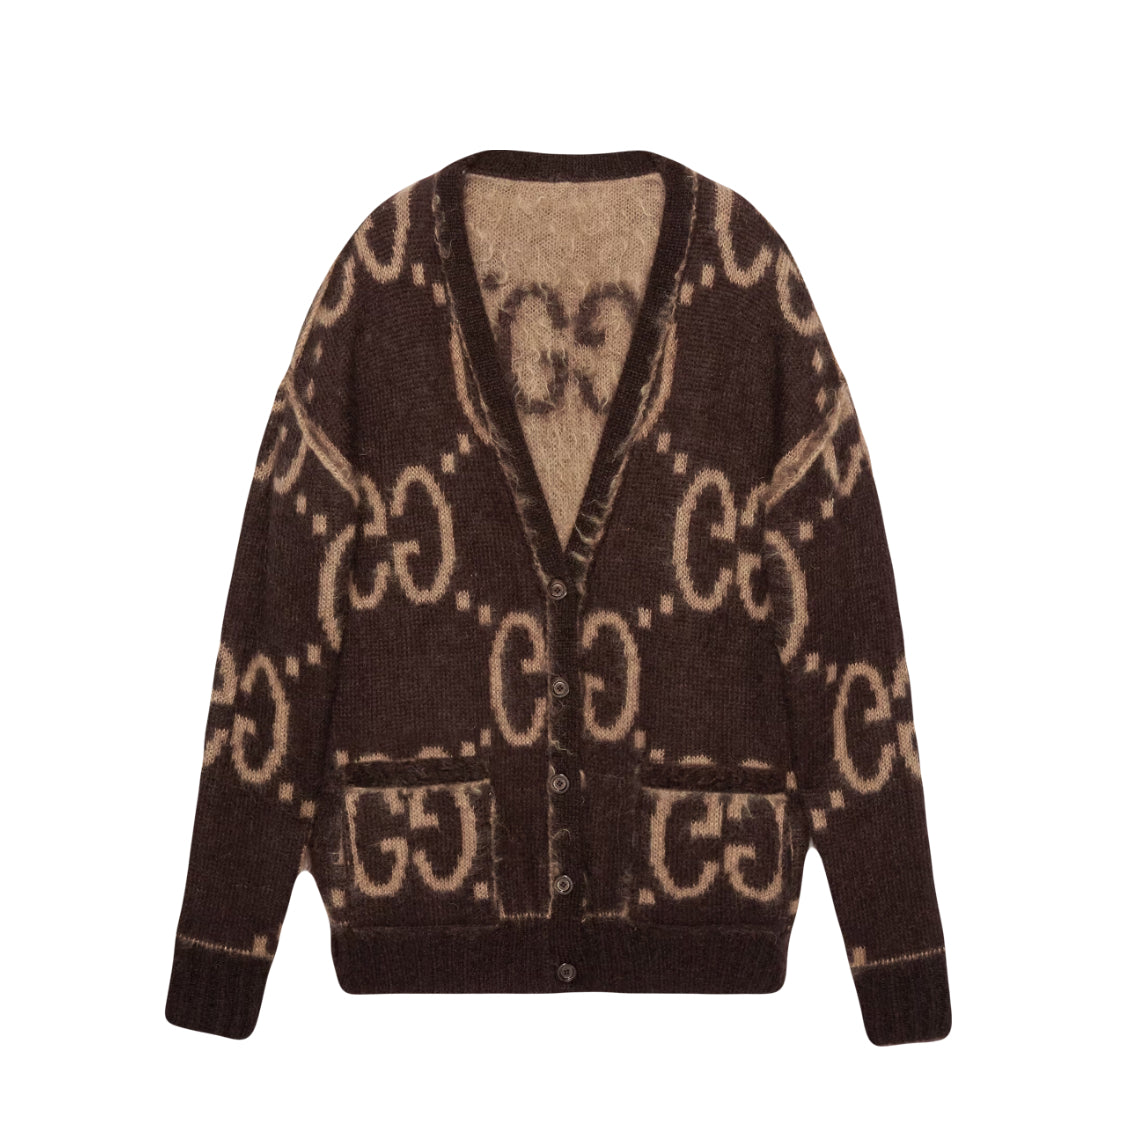 GUCCI reversible GG cardigan size M RRP: £1750